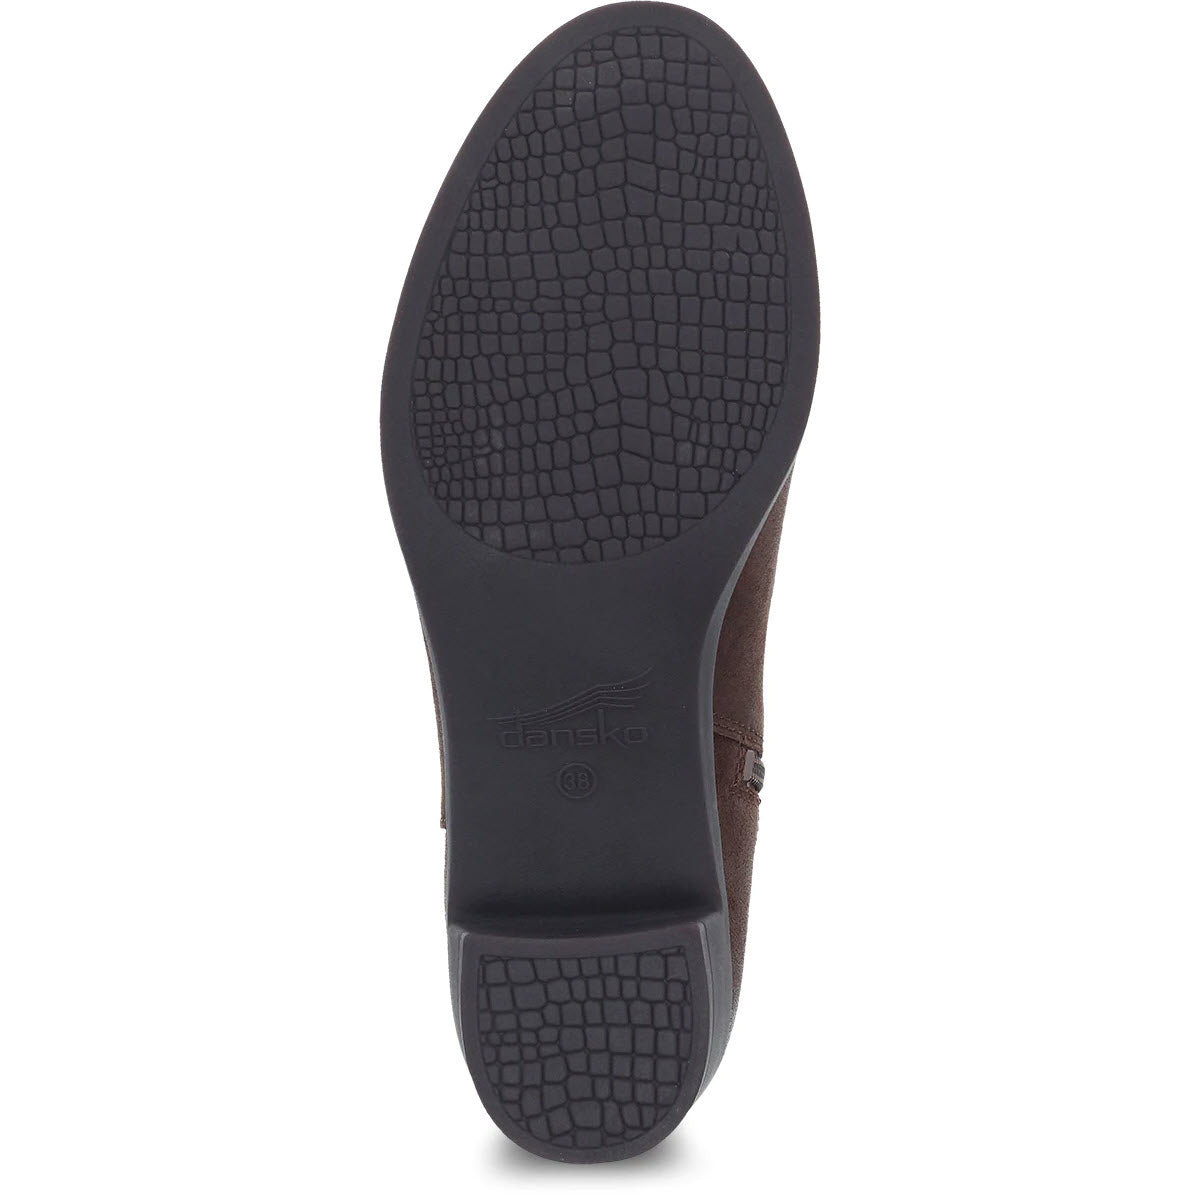 Sole of a brown Dansko Cagney heeled boot displaying the textured pattern and Dansko logo.